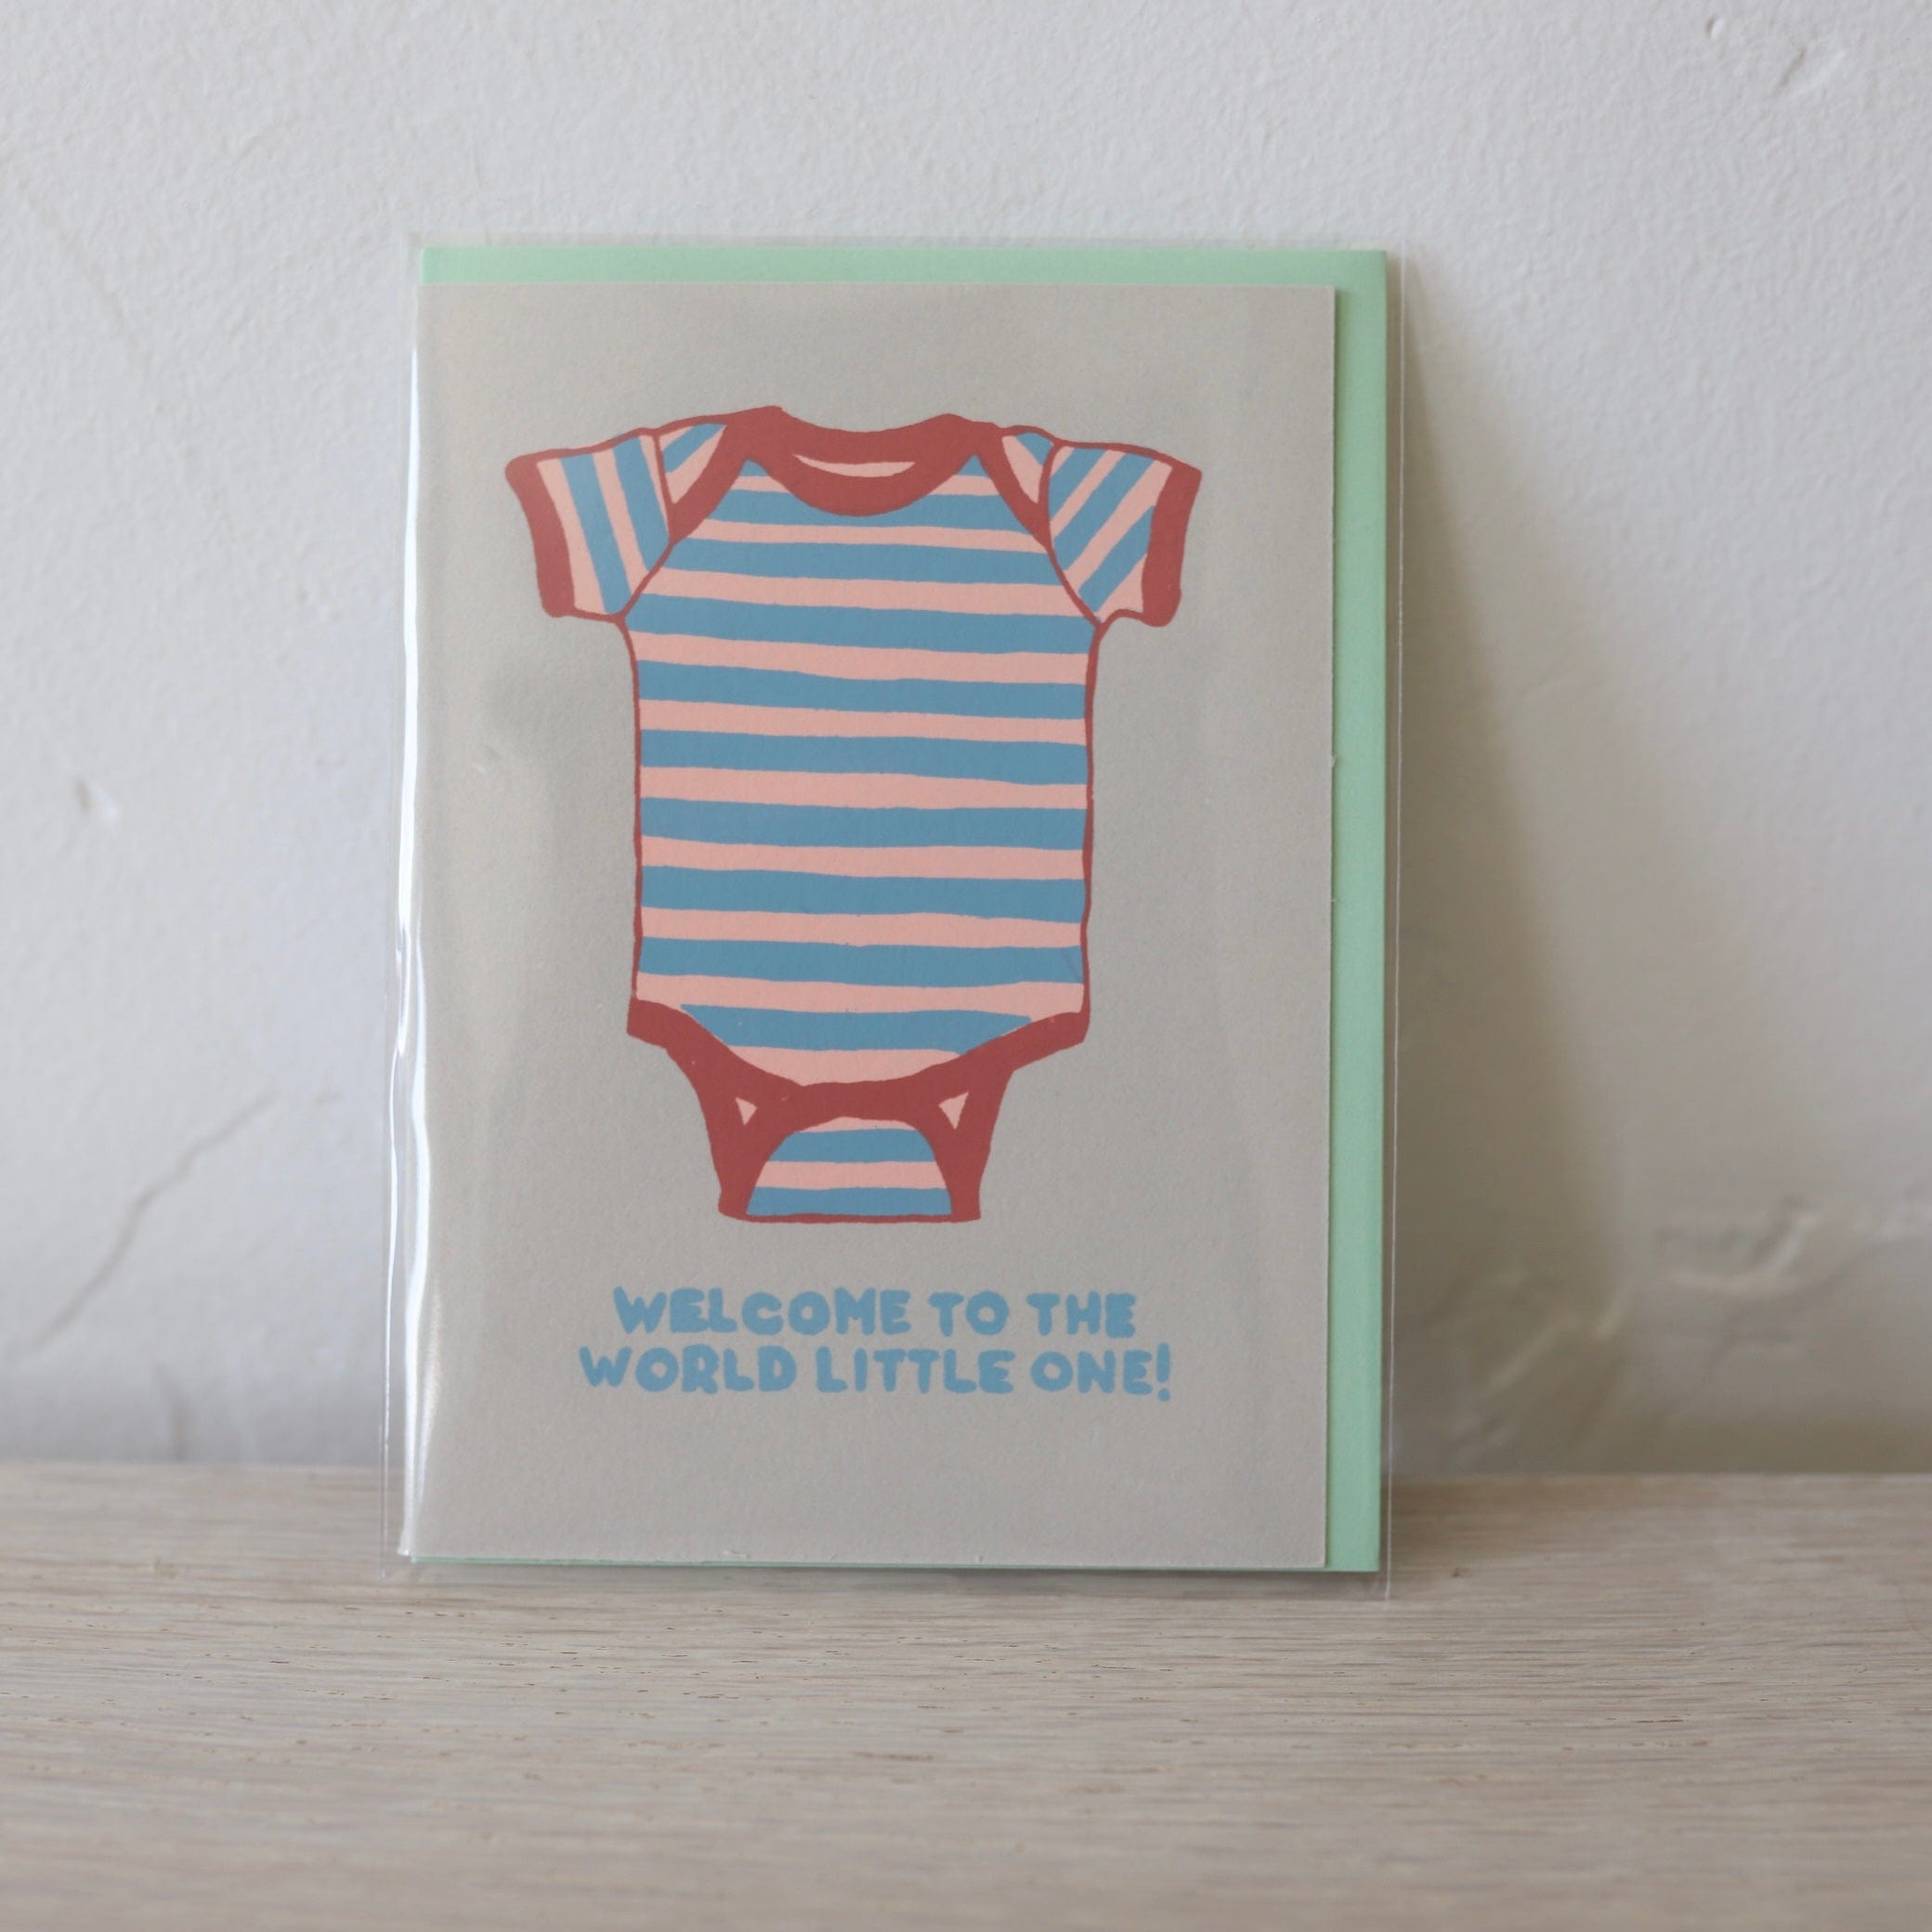 GOLD TEETH BROOKLYN Stationery Welcome to the World Little One Card